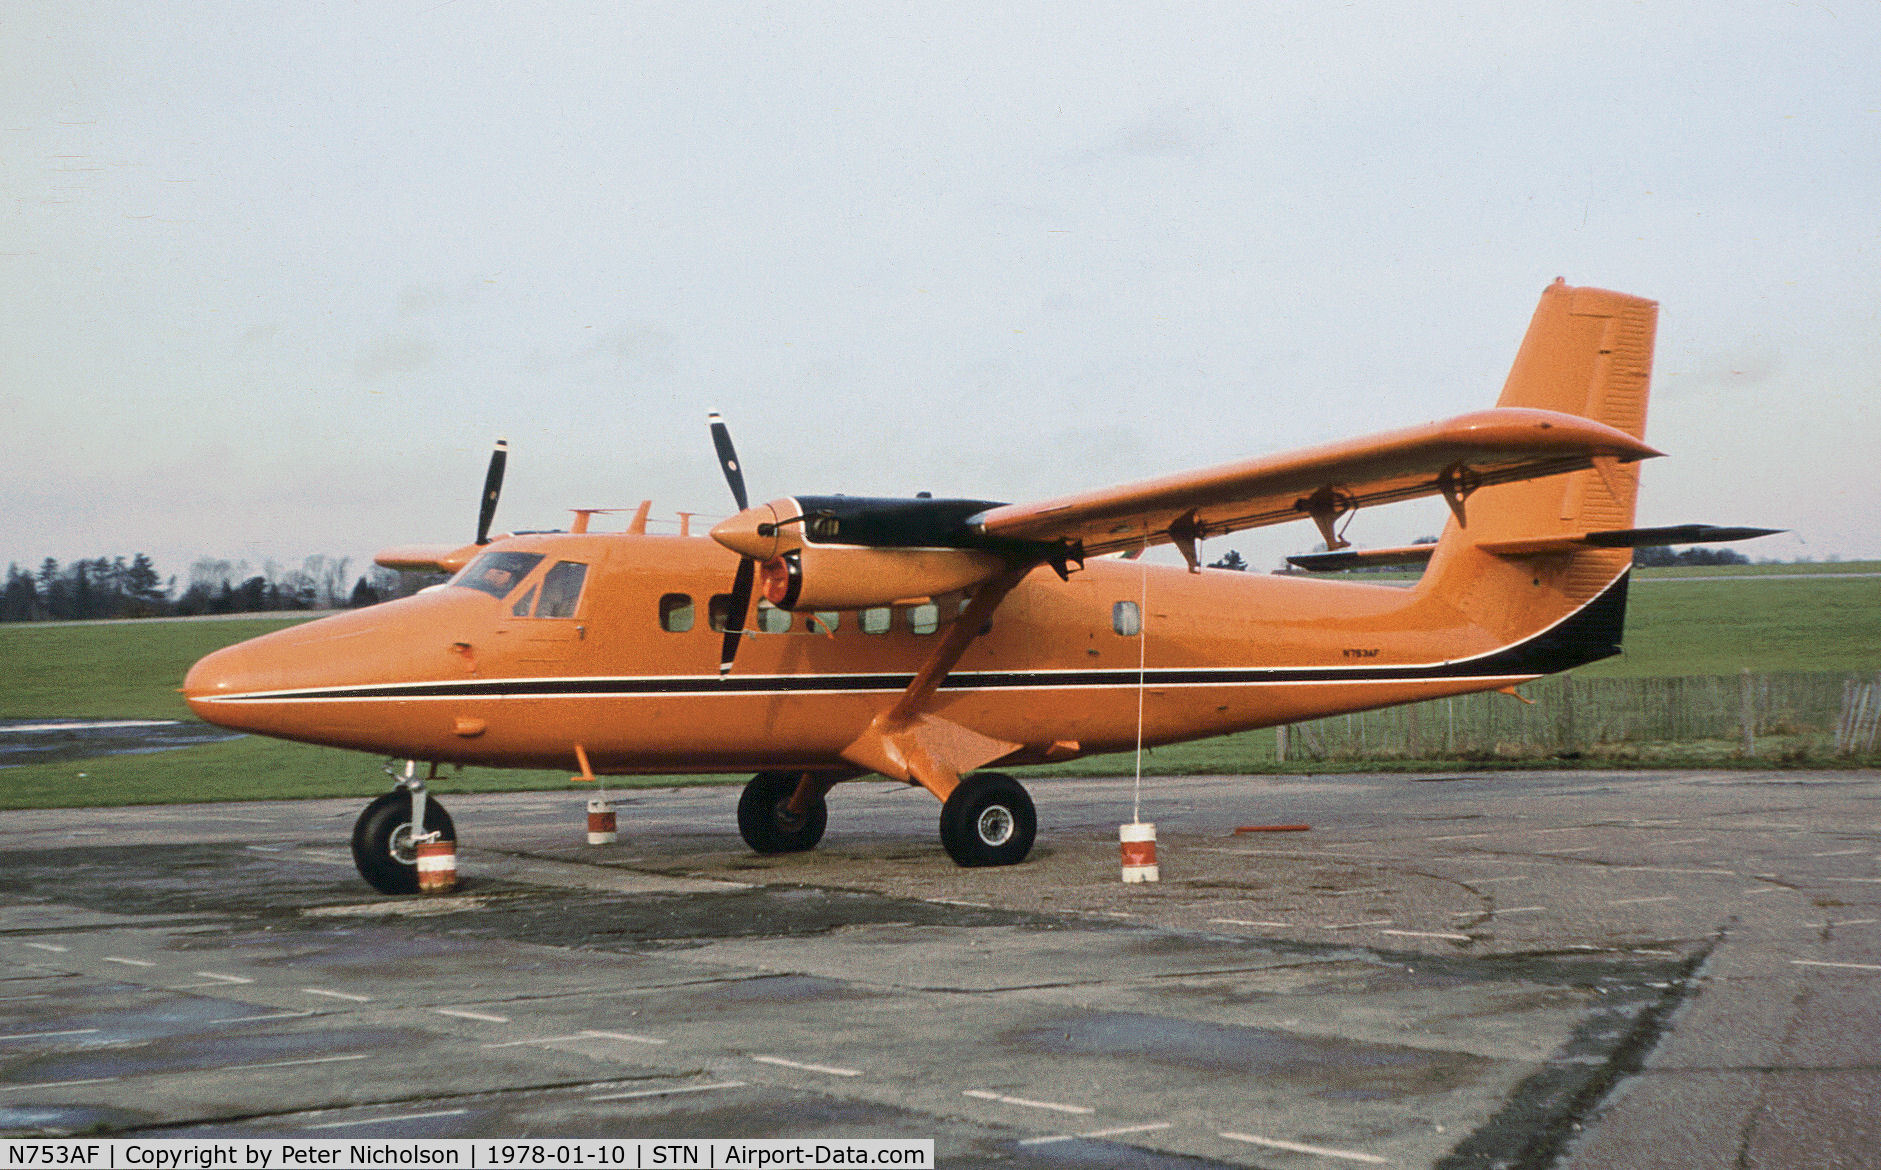 N753AF, 1969 De Havilland Canada DHC-6-200 Twin Otter C/N 206, DHC-6 Twin Otter 200 visiting Stansted in January 1978.